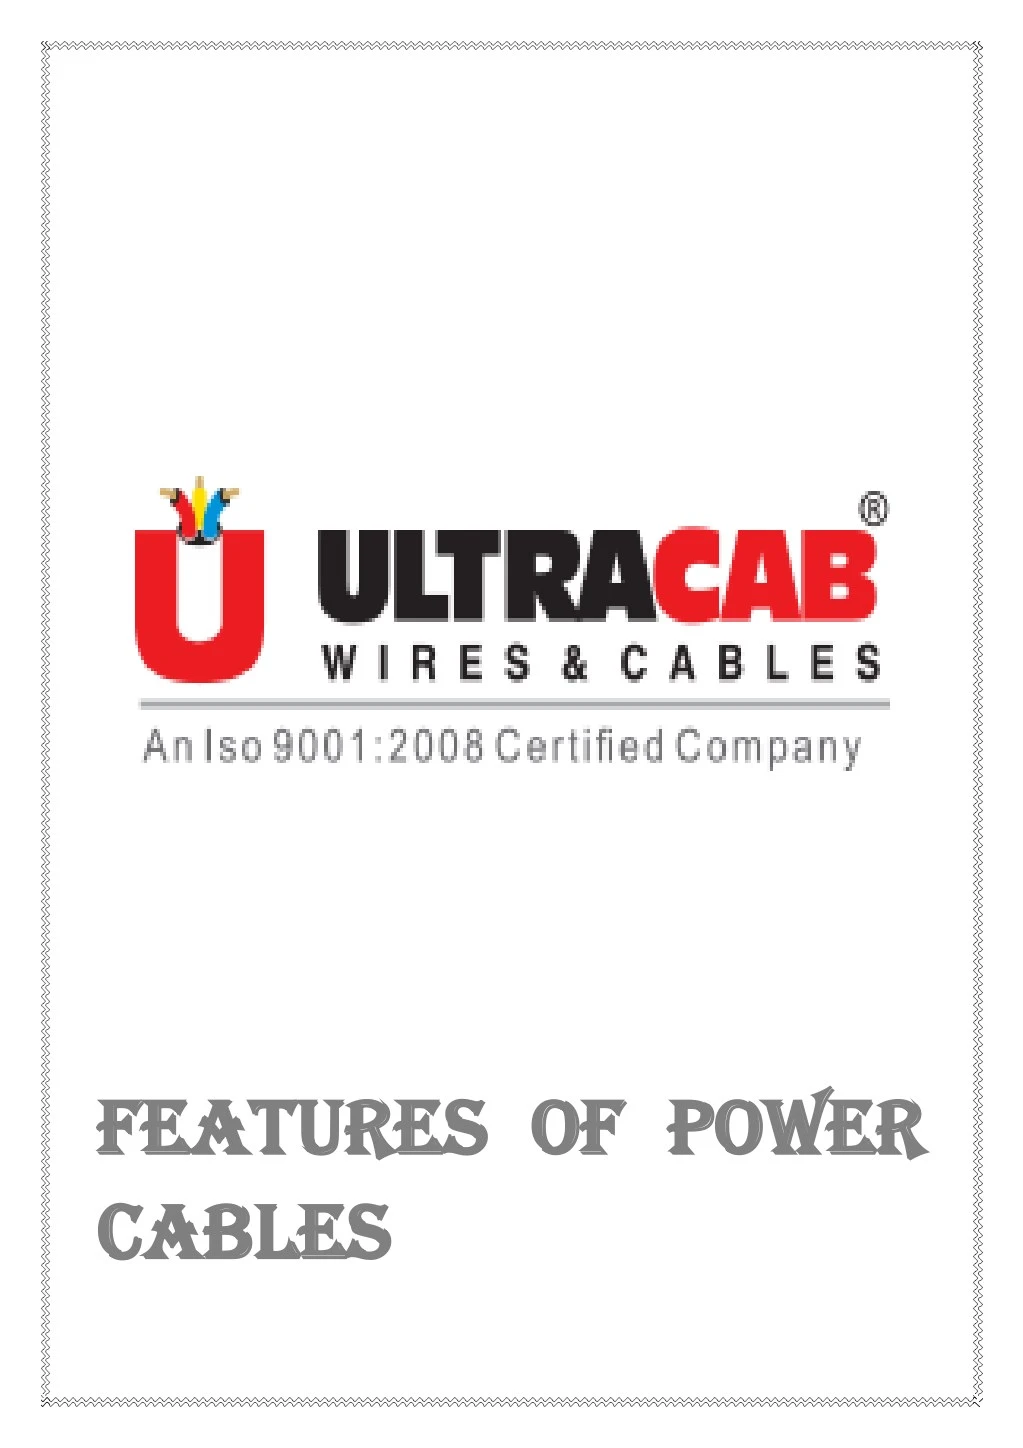 features of power features of power cables cables